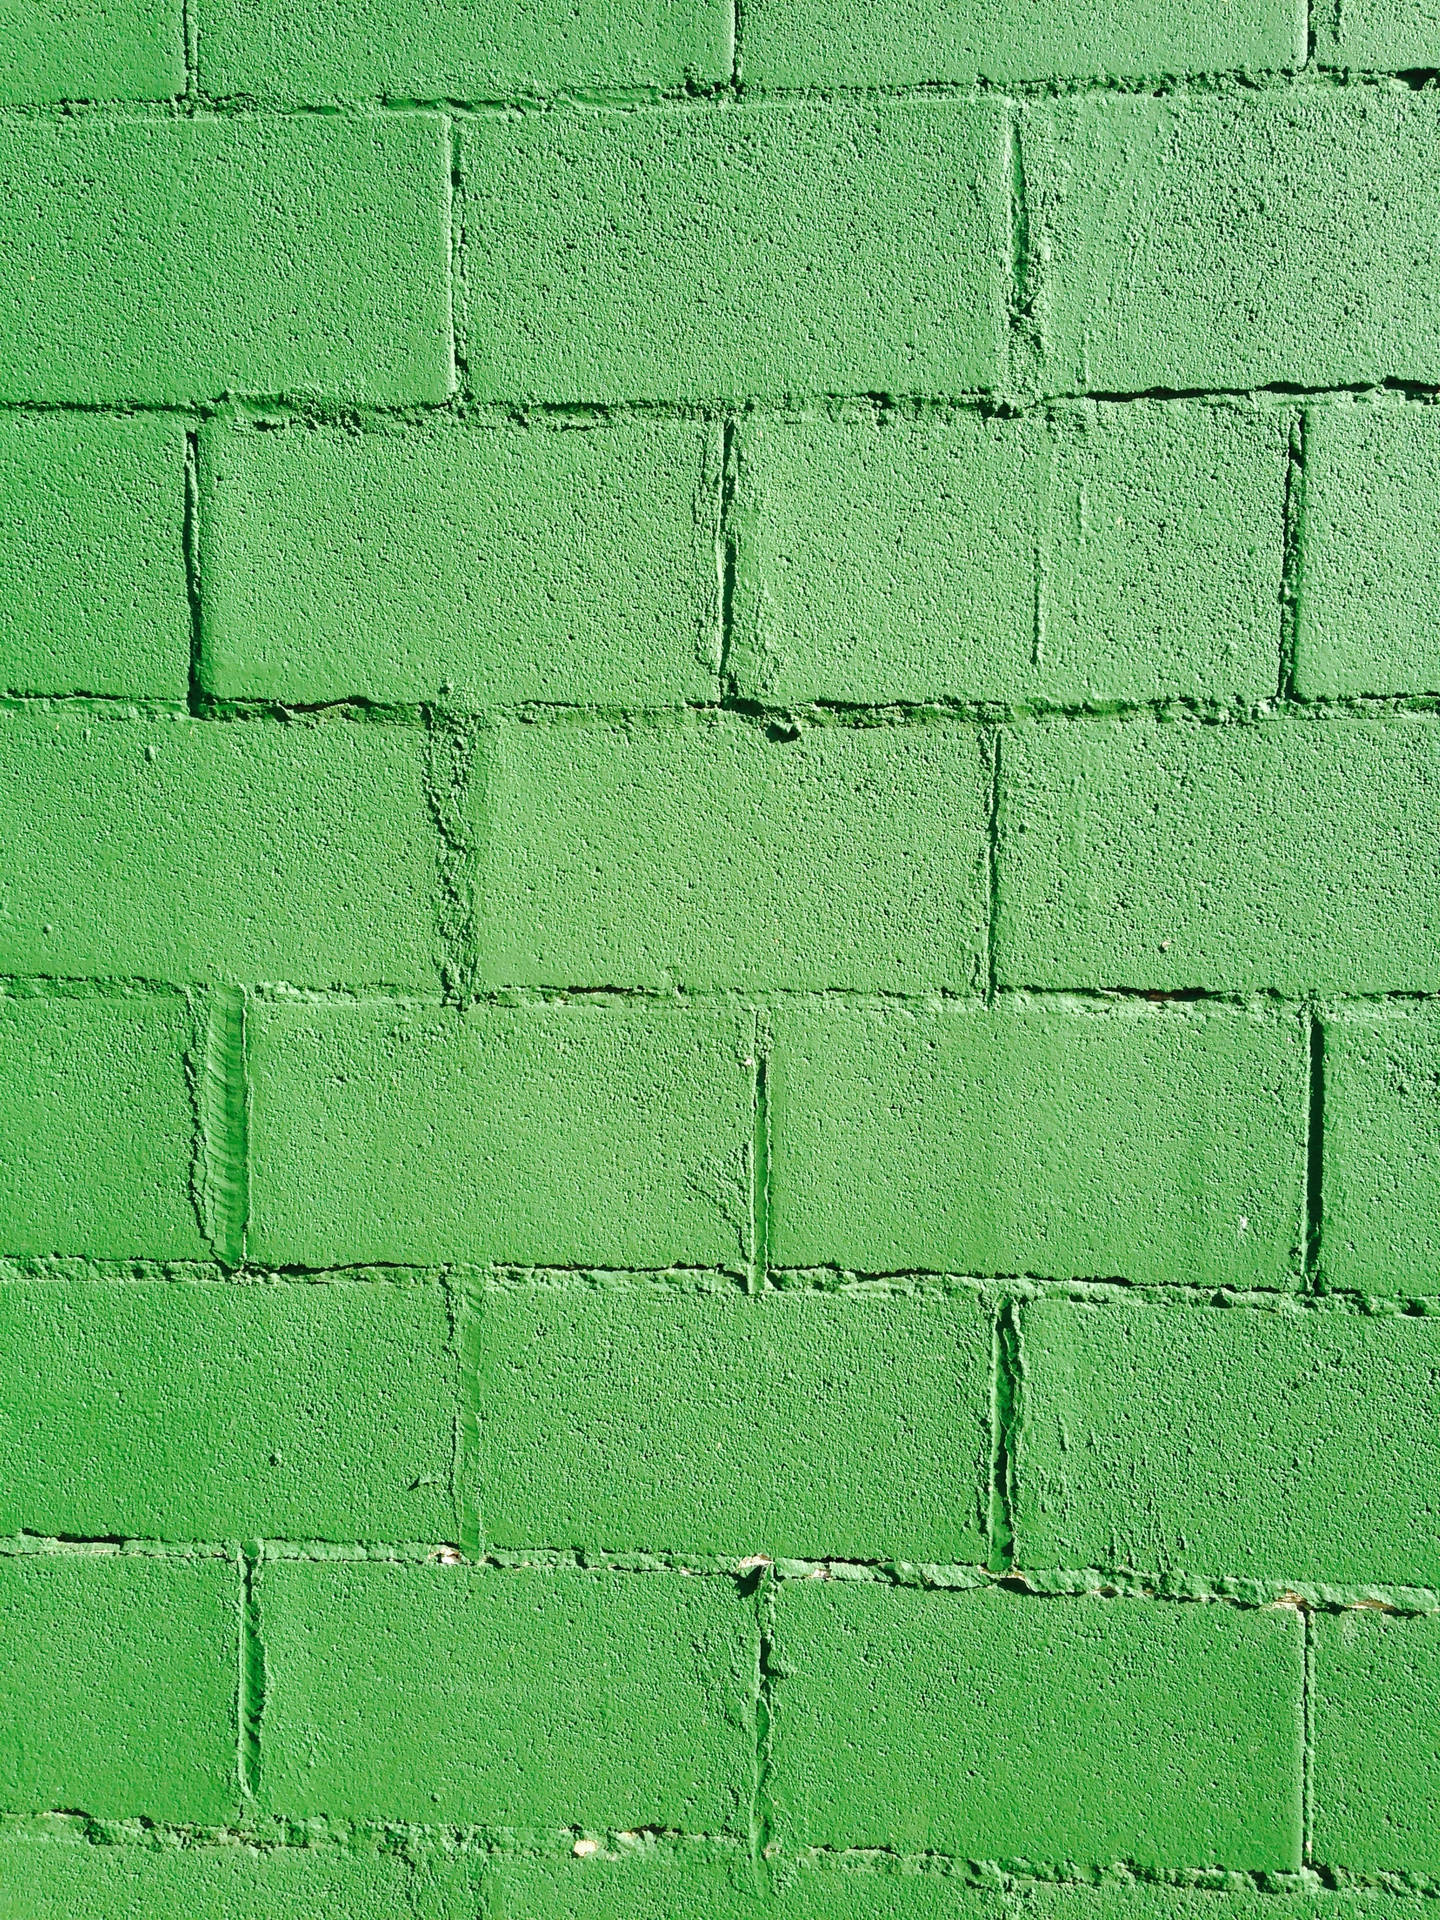 Brick 2448X3264 Wallpaper and Background Image